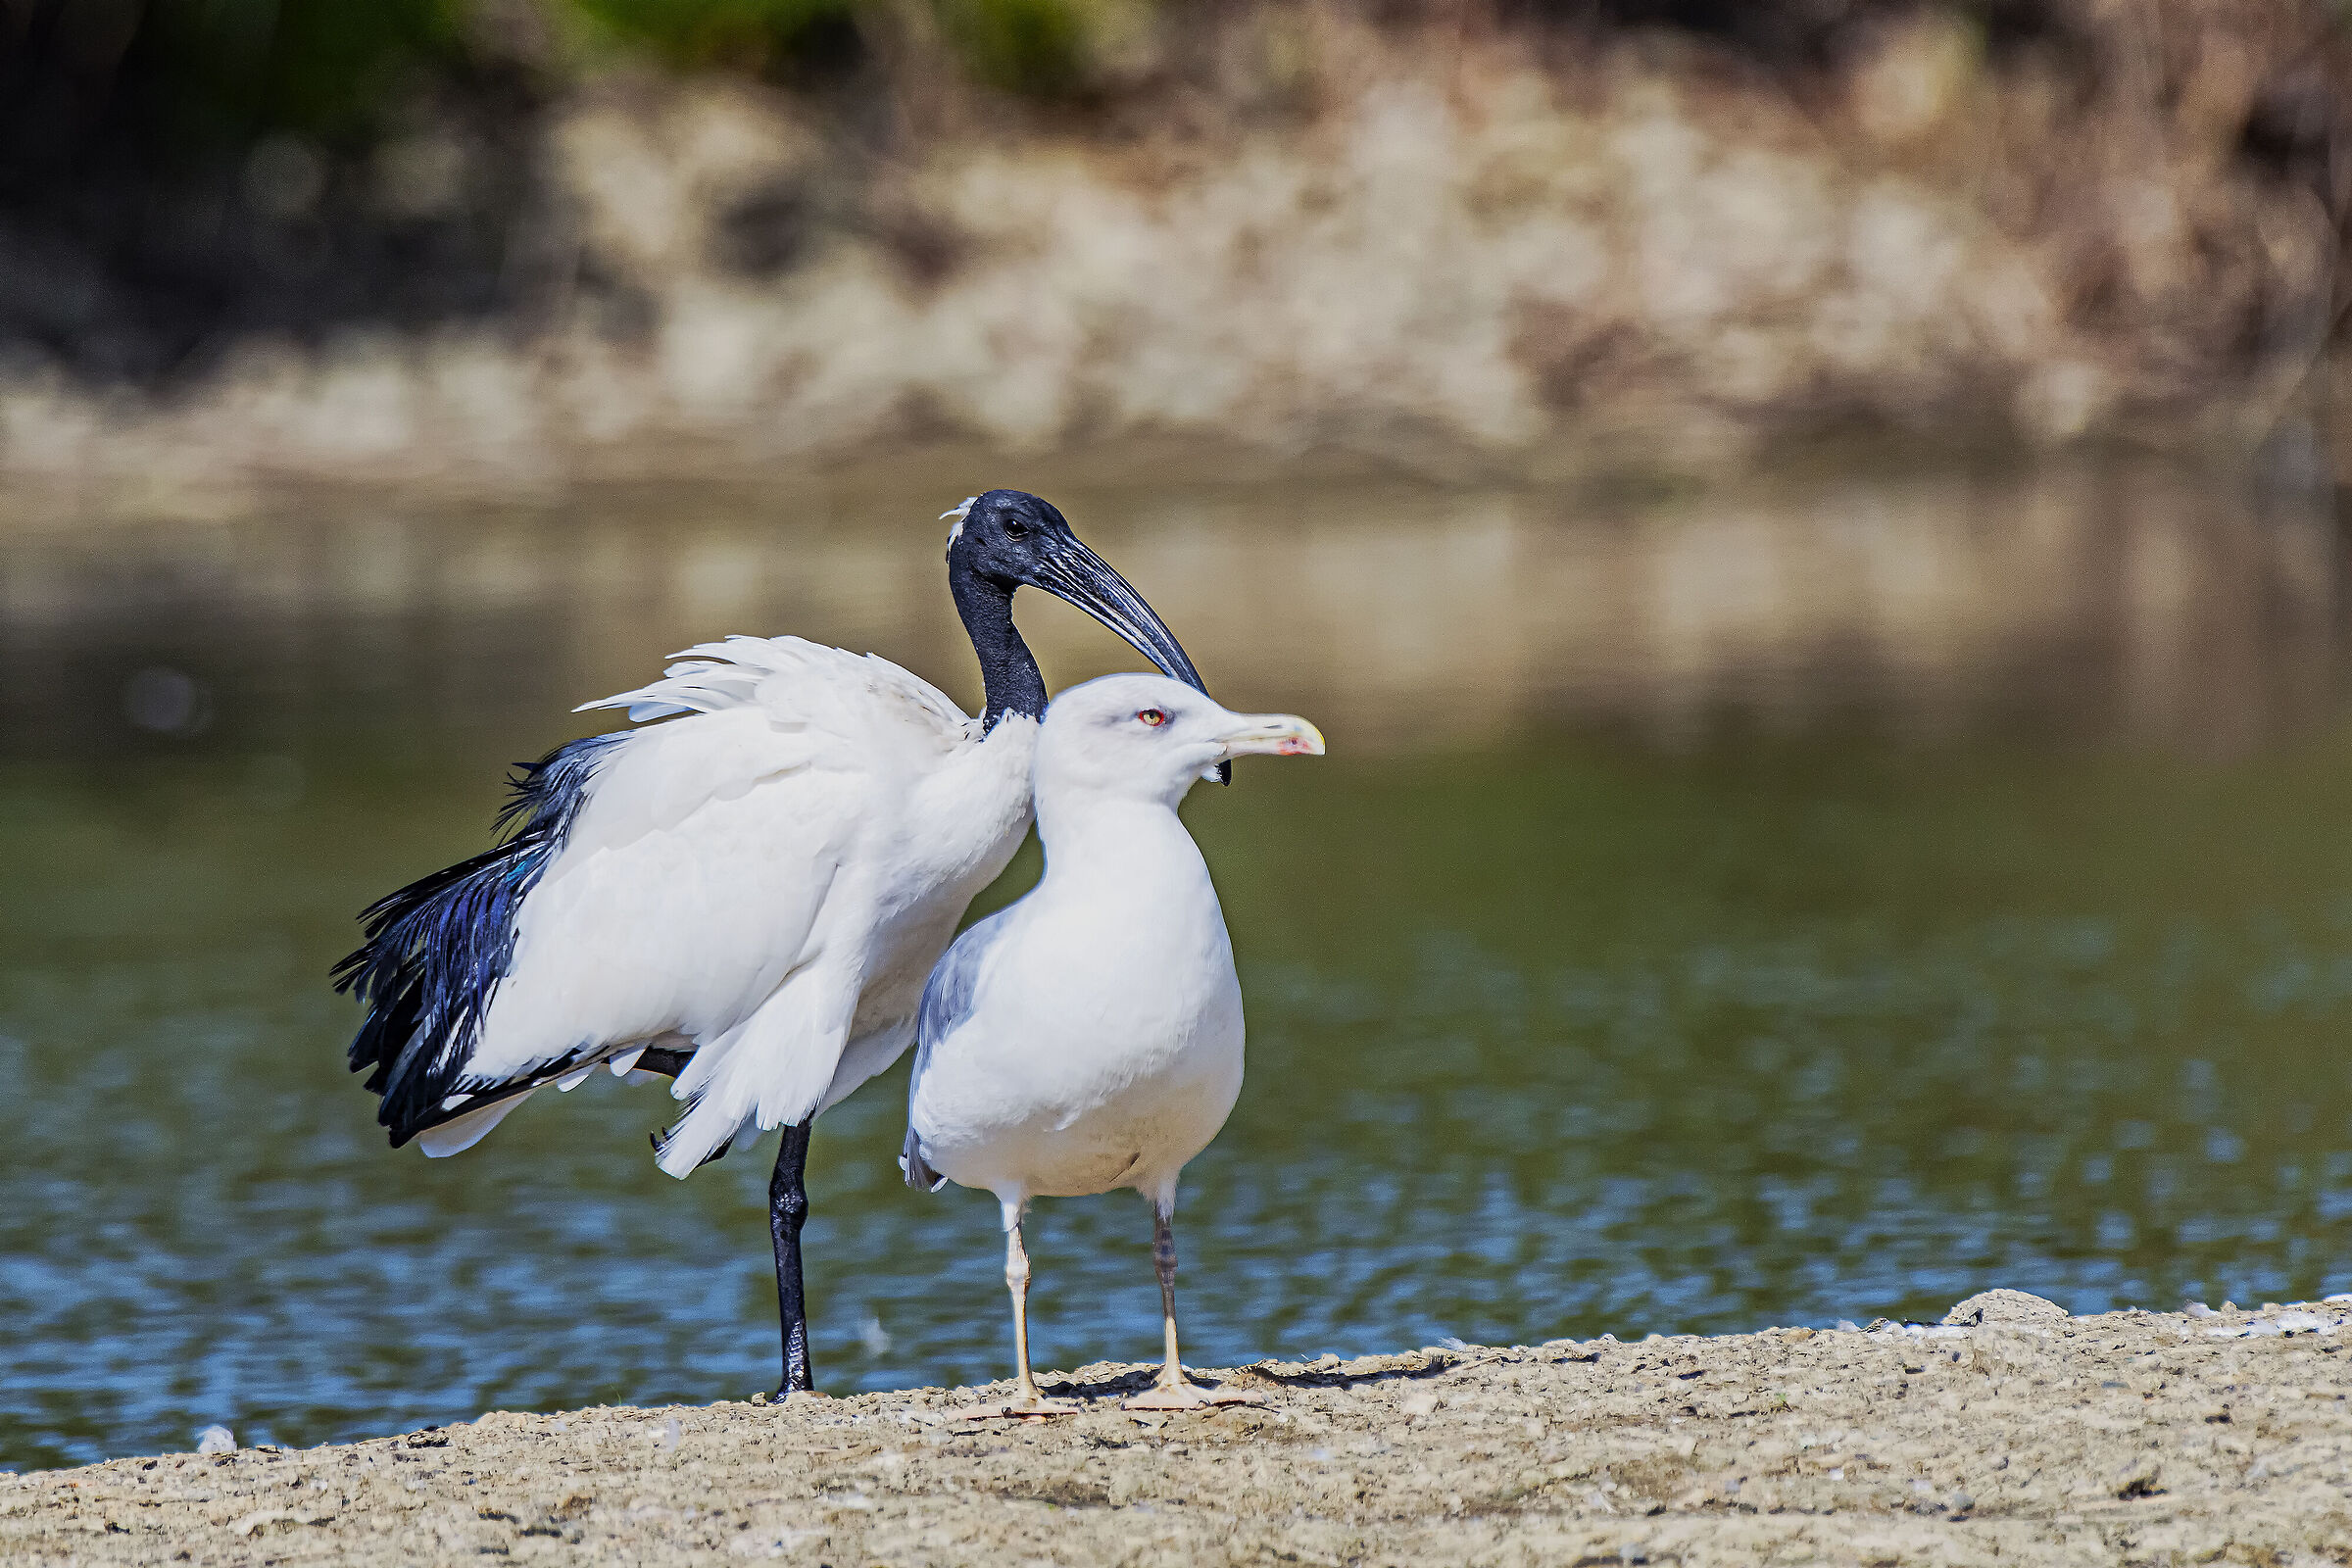 The Seagull and the Sacred Ibis...